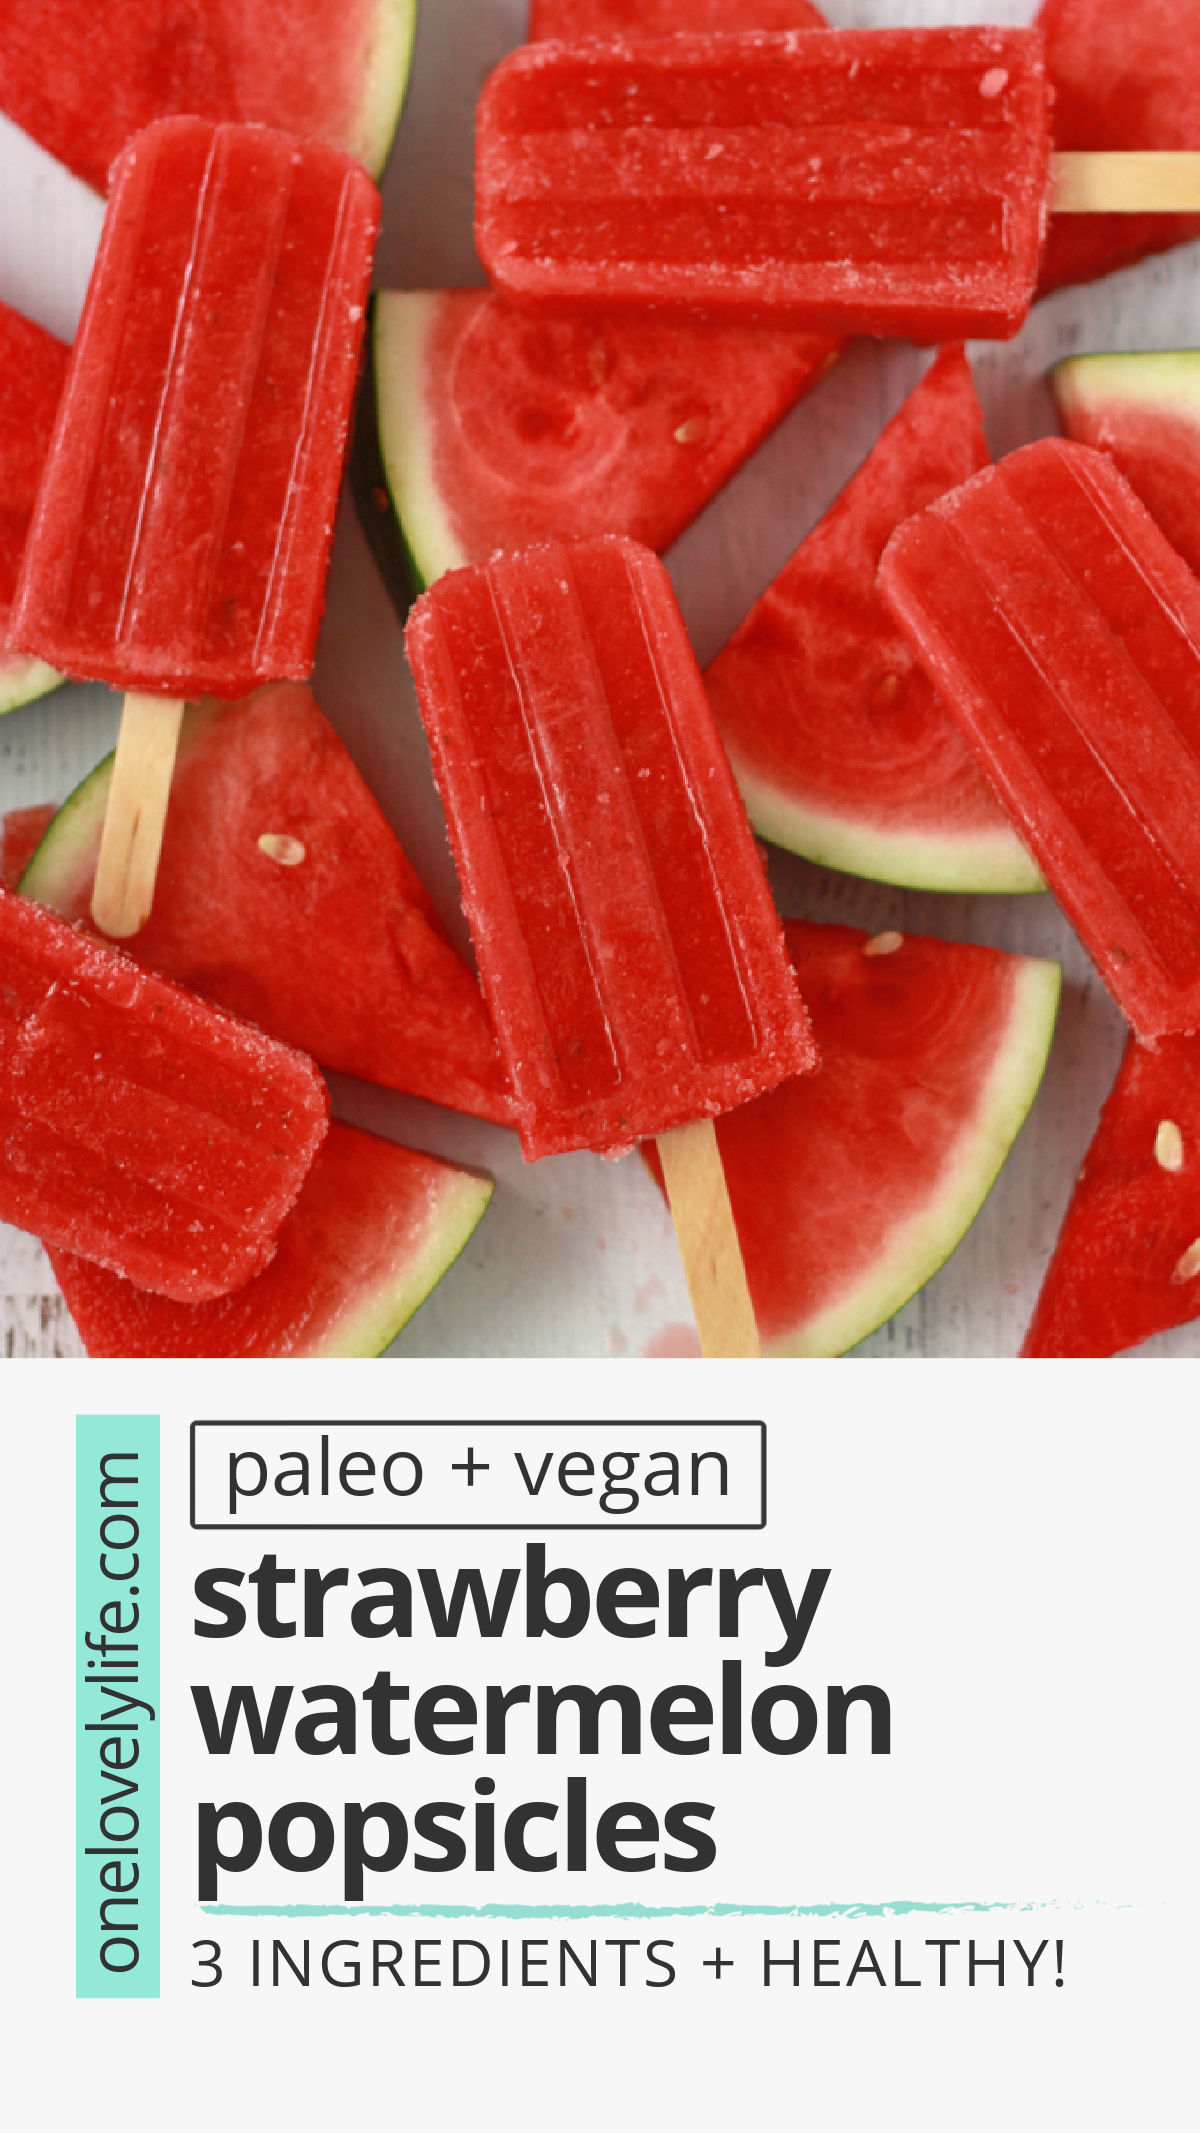 Strawberry Watermelon Popsicles are a fresh, bright, healthy warm weather treat! They're 100% fruit and naturally help balance your electrolytes. (Vegan & paleo) // healthy popsicles // strawberry popsicles // watermelon popsicles // paleo popsicles // vegan popsicles // naturally sweetened // healthy snack // #healthy #popsicles #icepops #paleo #vegan #dessert